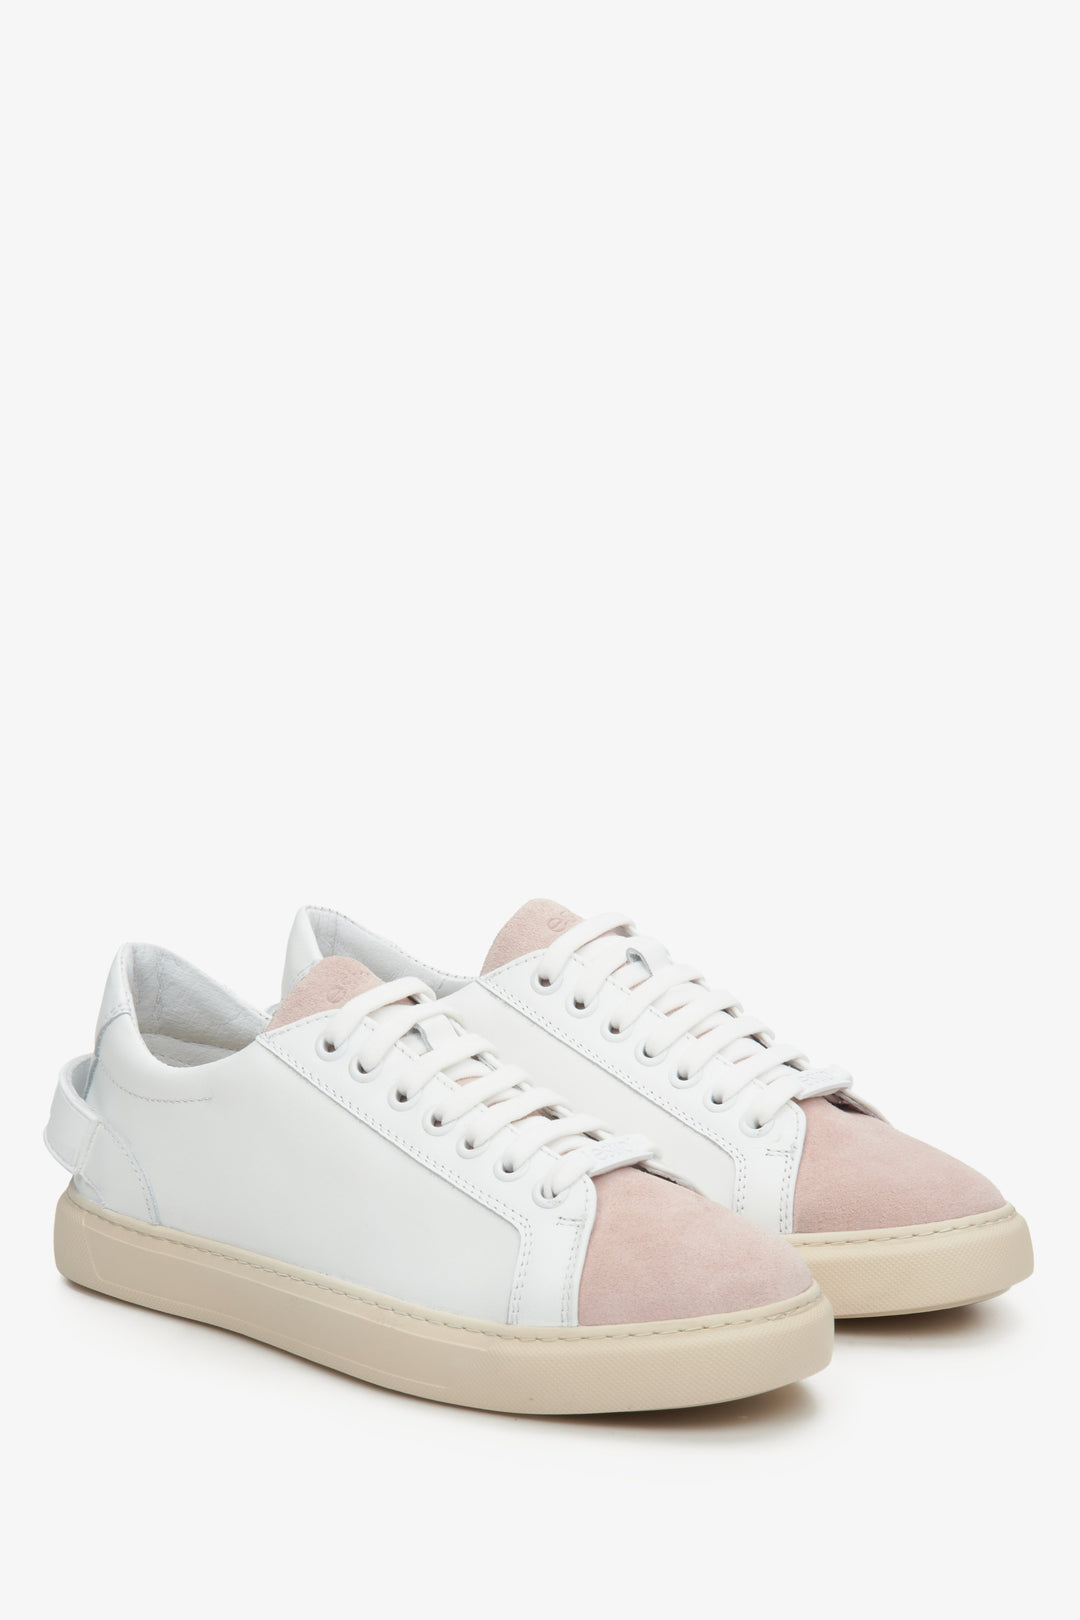 Women's White & Pink Sneakers made of Genuine Leather and Velour Estro ER00112839.